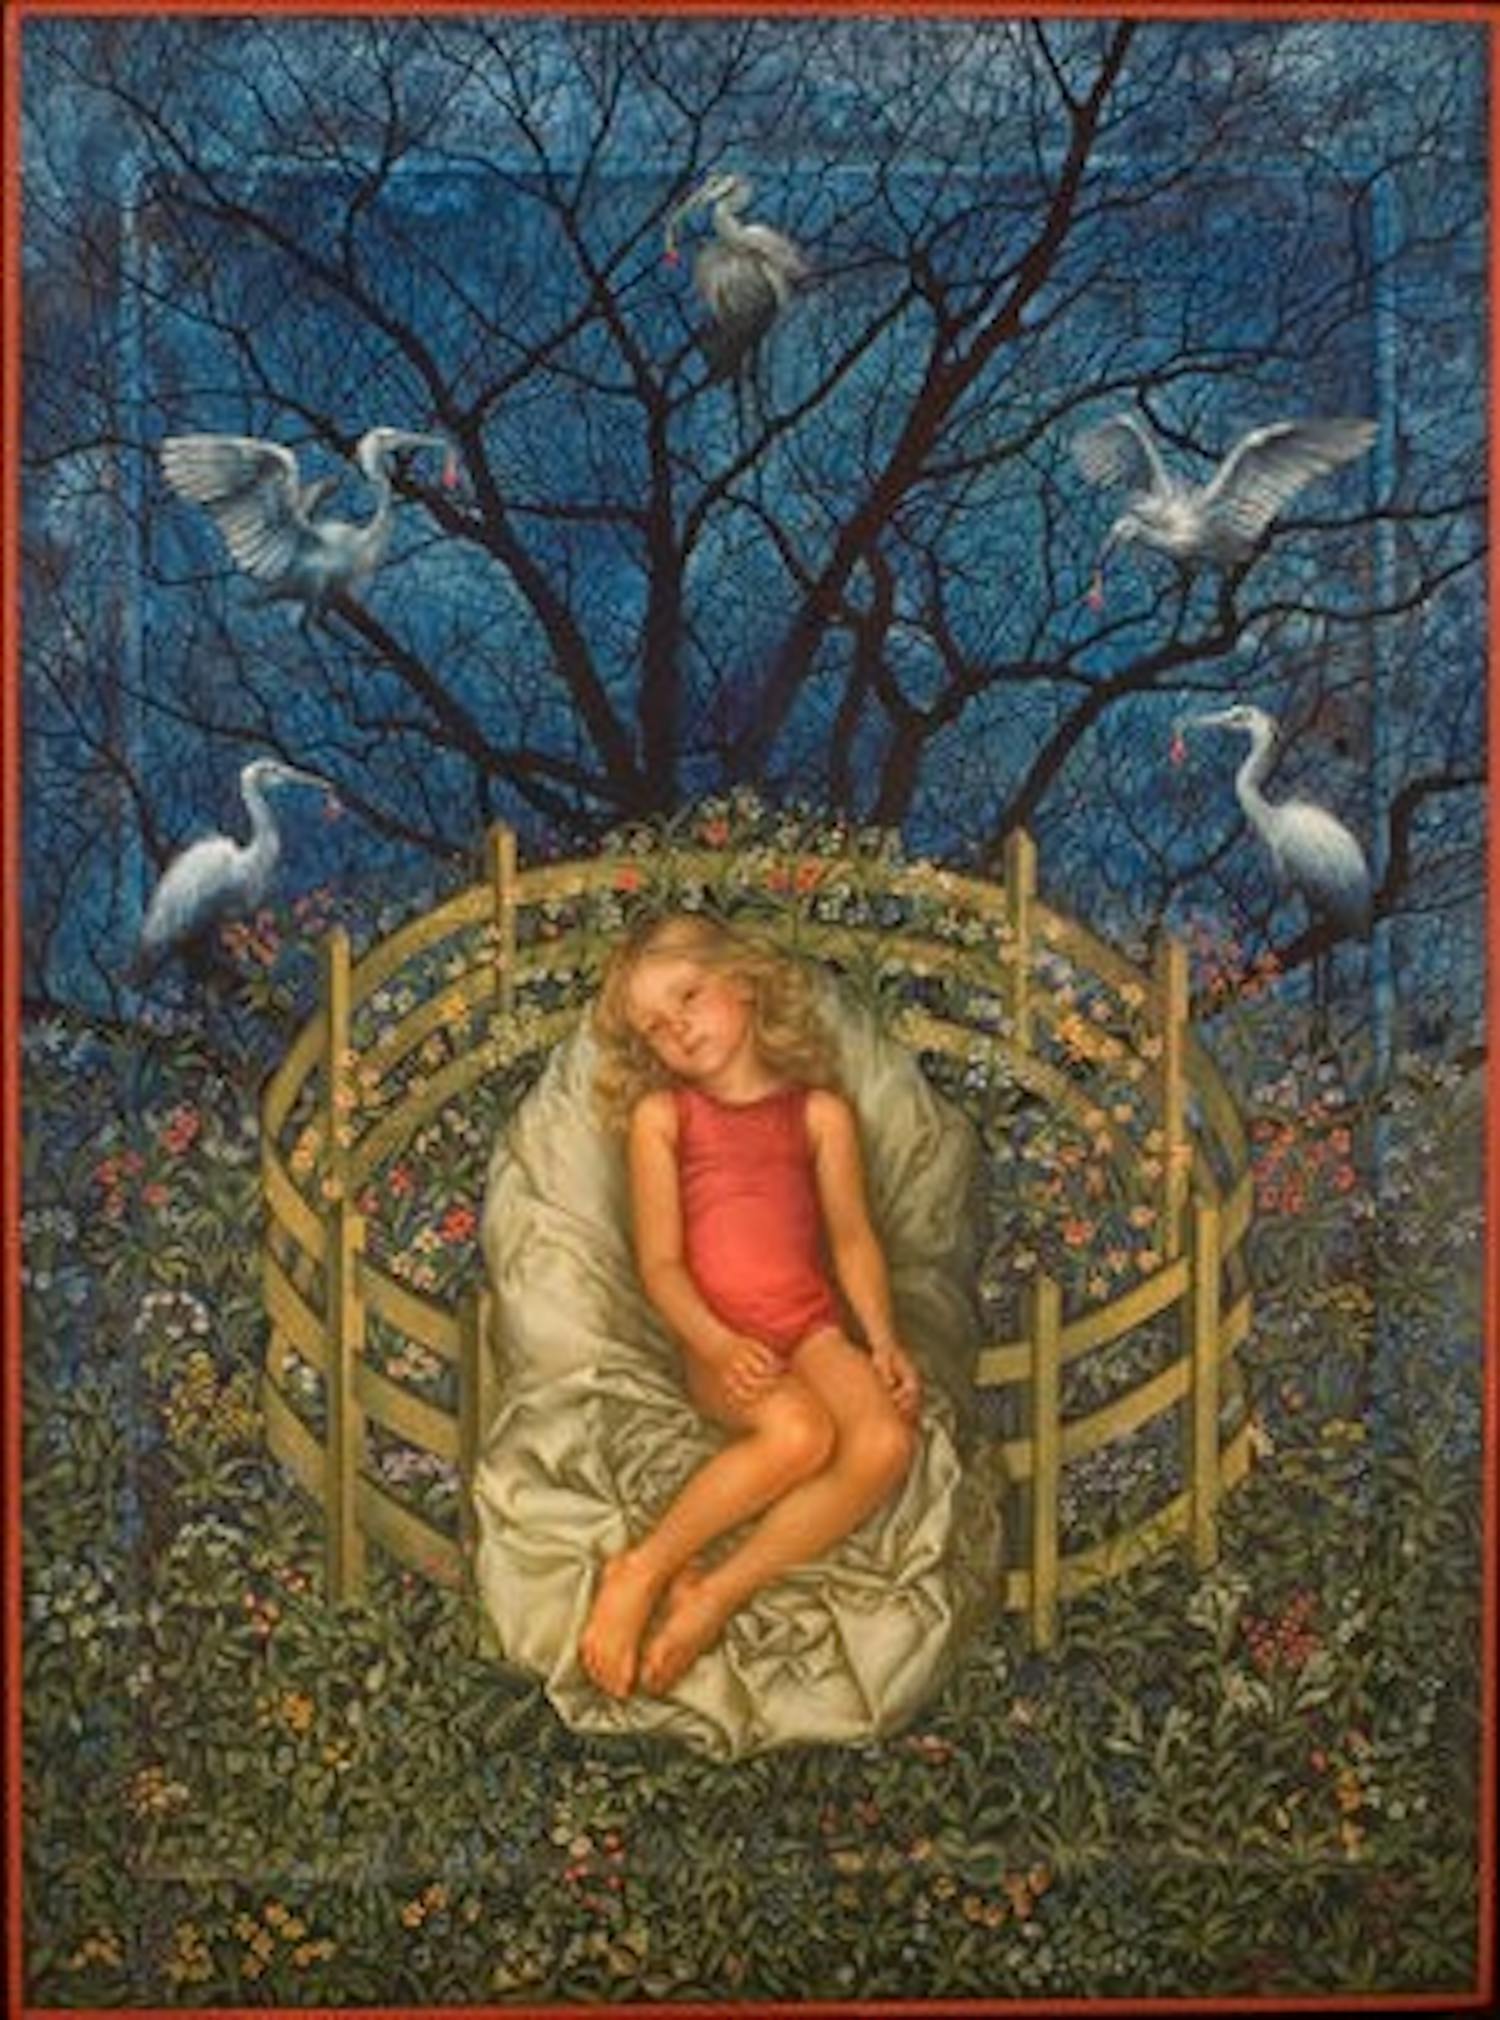 Scherer and Ouporov created "Language of the Birds" in 2009 using egg tempera, gemstones and 24-karat gold on wood panel. (Contributed by Jule Collins Smith Museum of Fine Art)